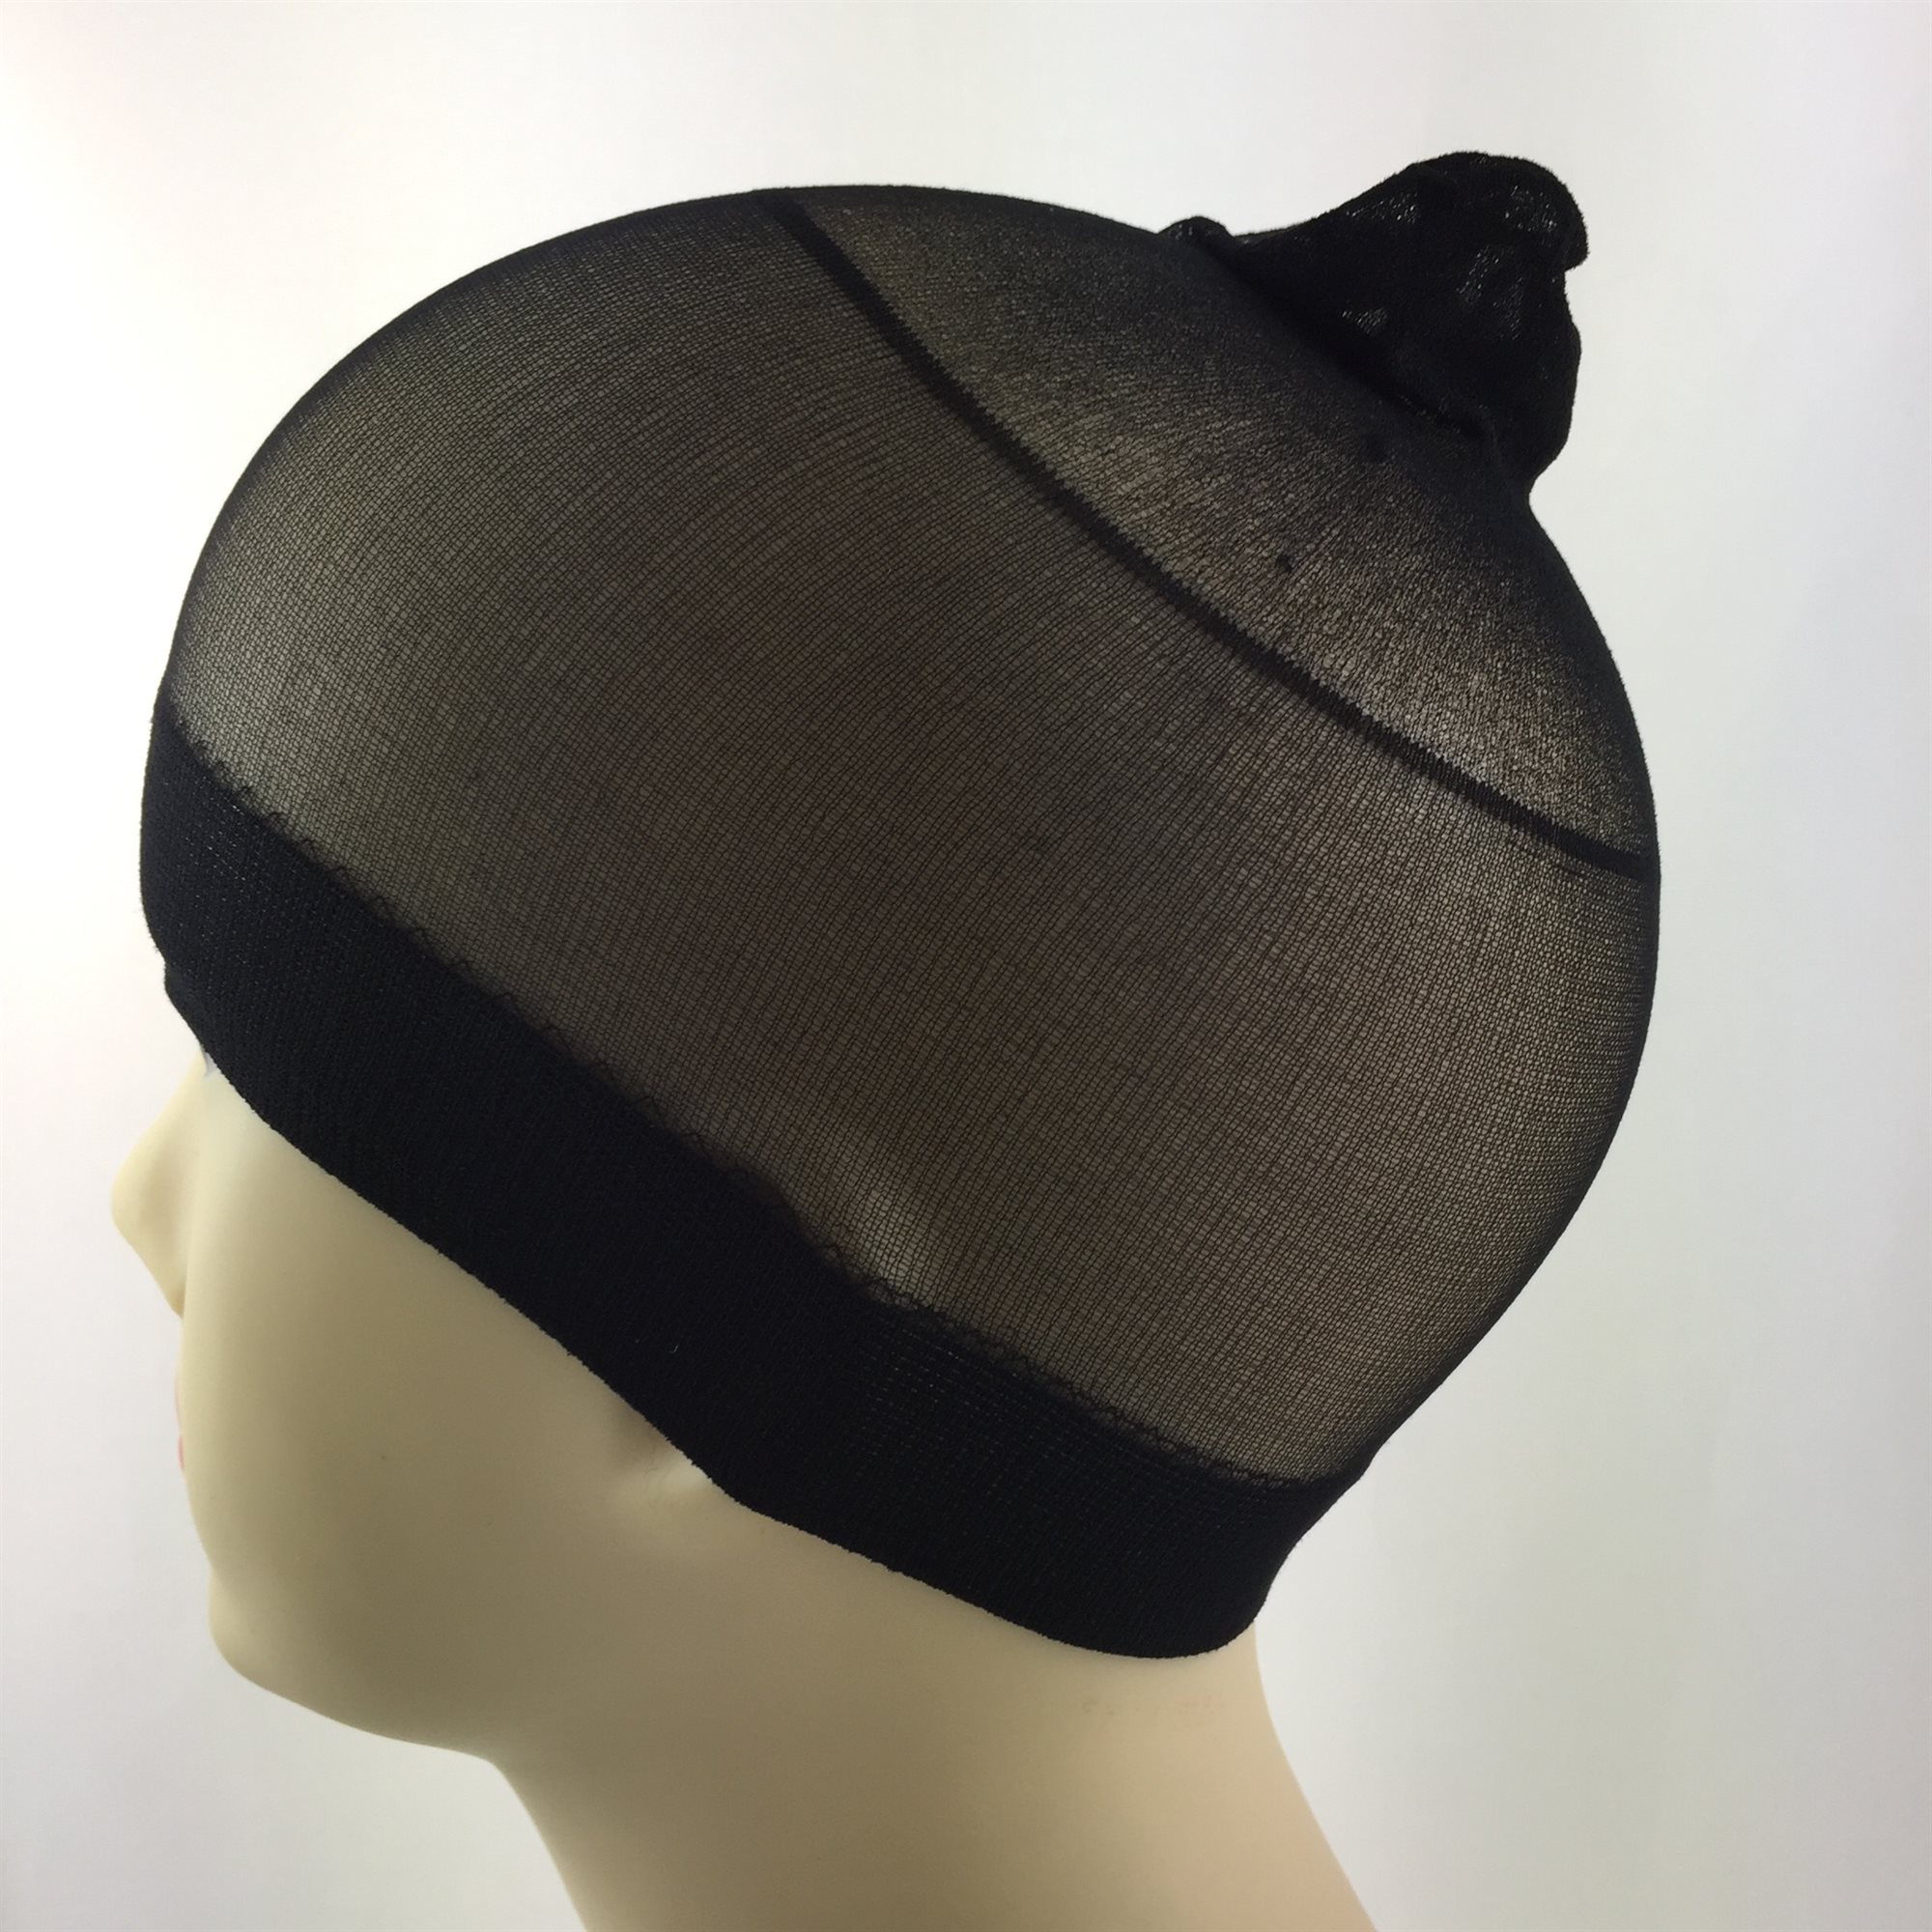 Stocking Wave Cap 2 in one pack. Black.